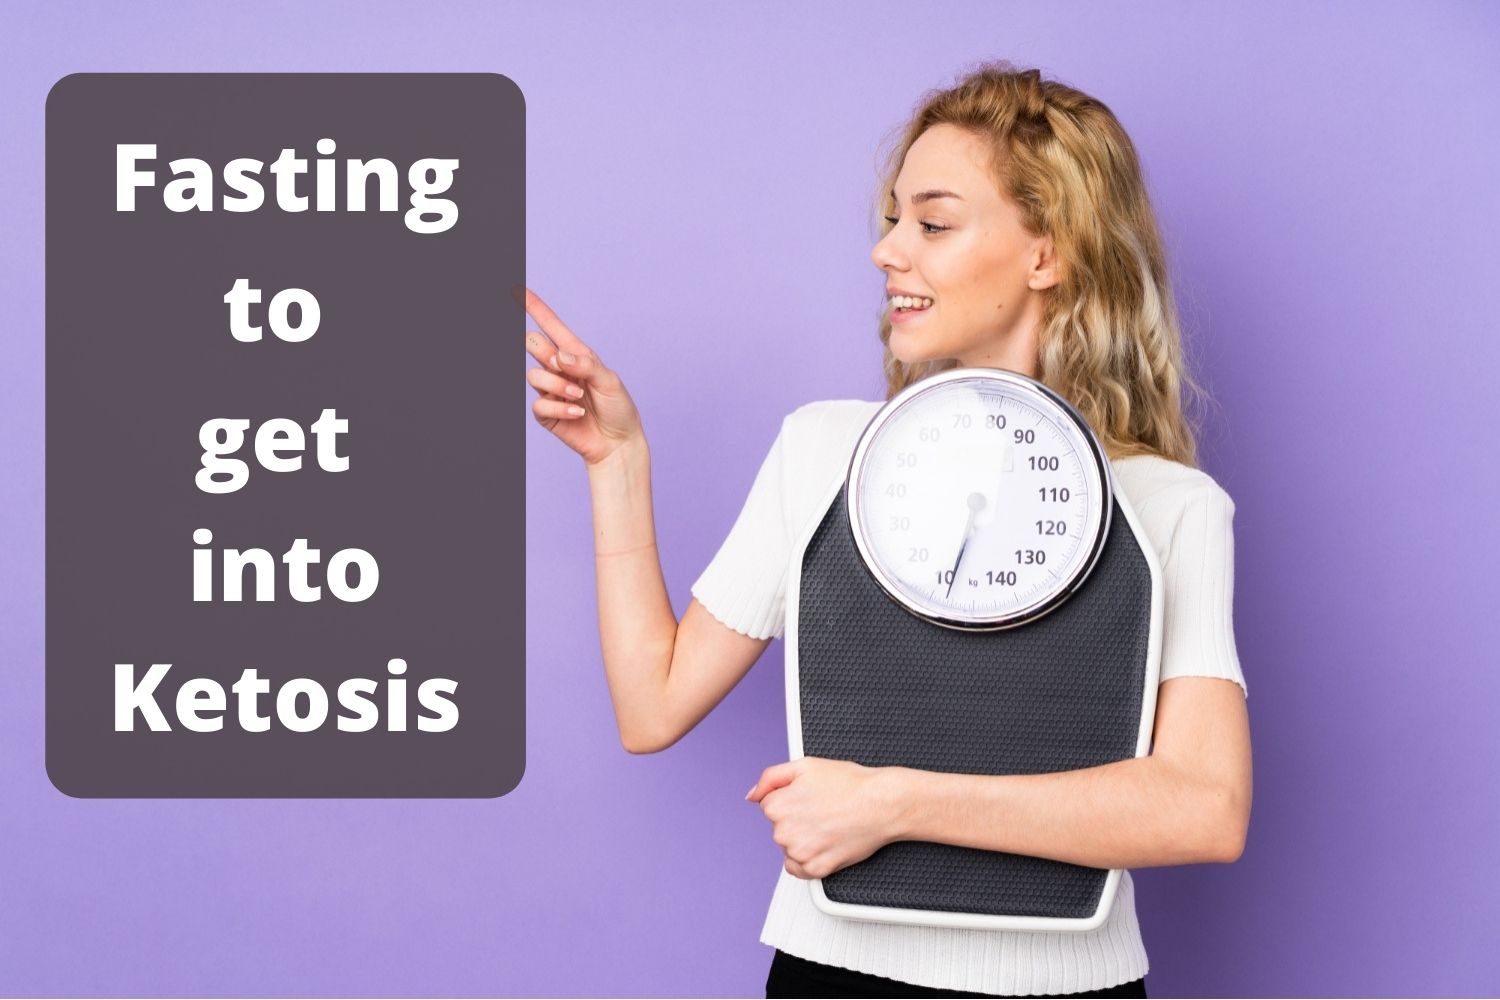 Fasting to Get into Ketosis